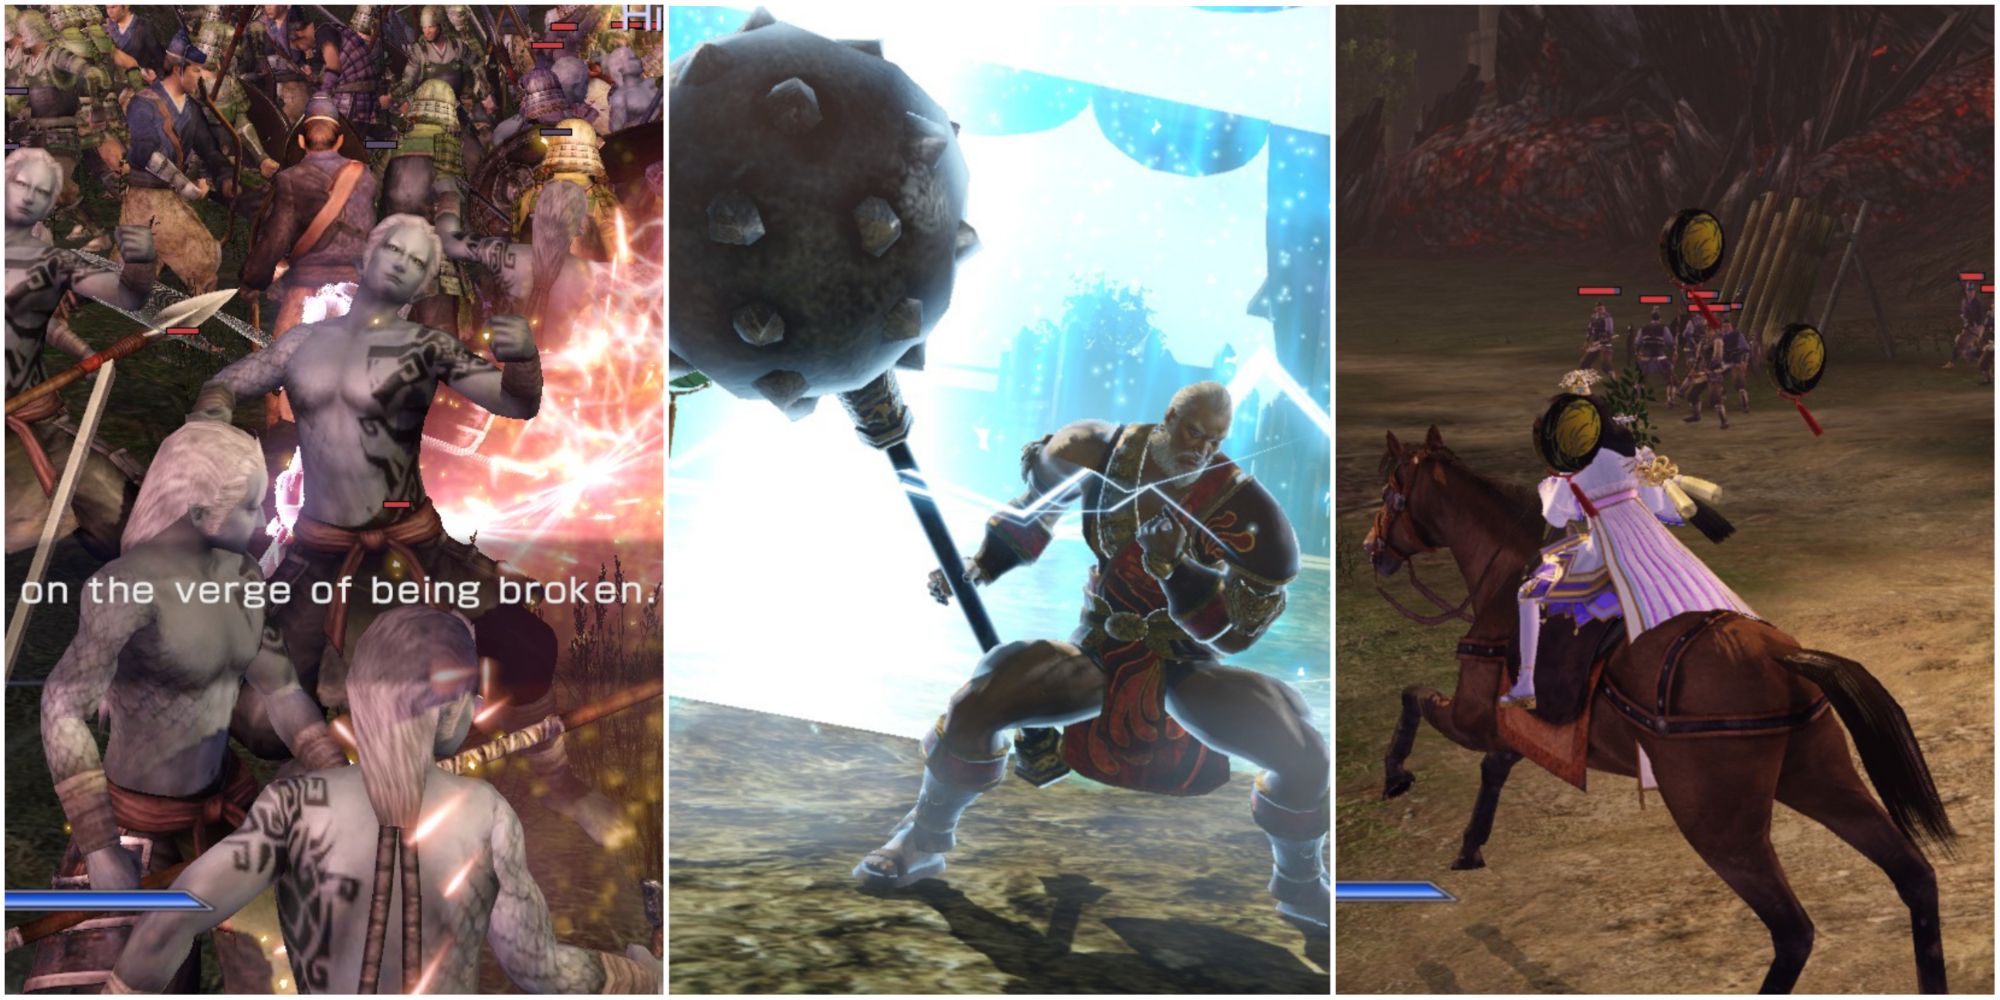 Warriors Orochi 3 Ultimate - a battlefield, a man surrounded by lightning, and a woman on a horse